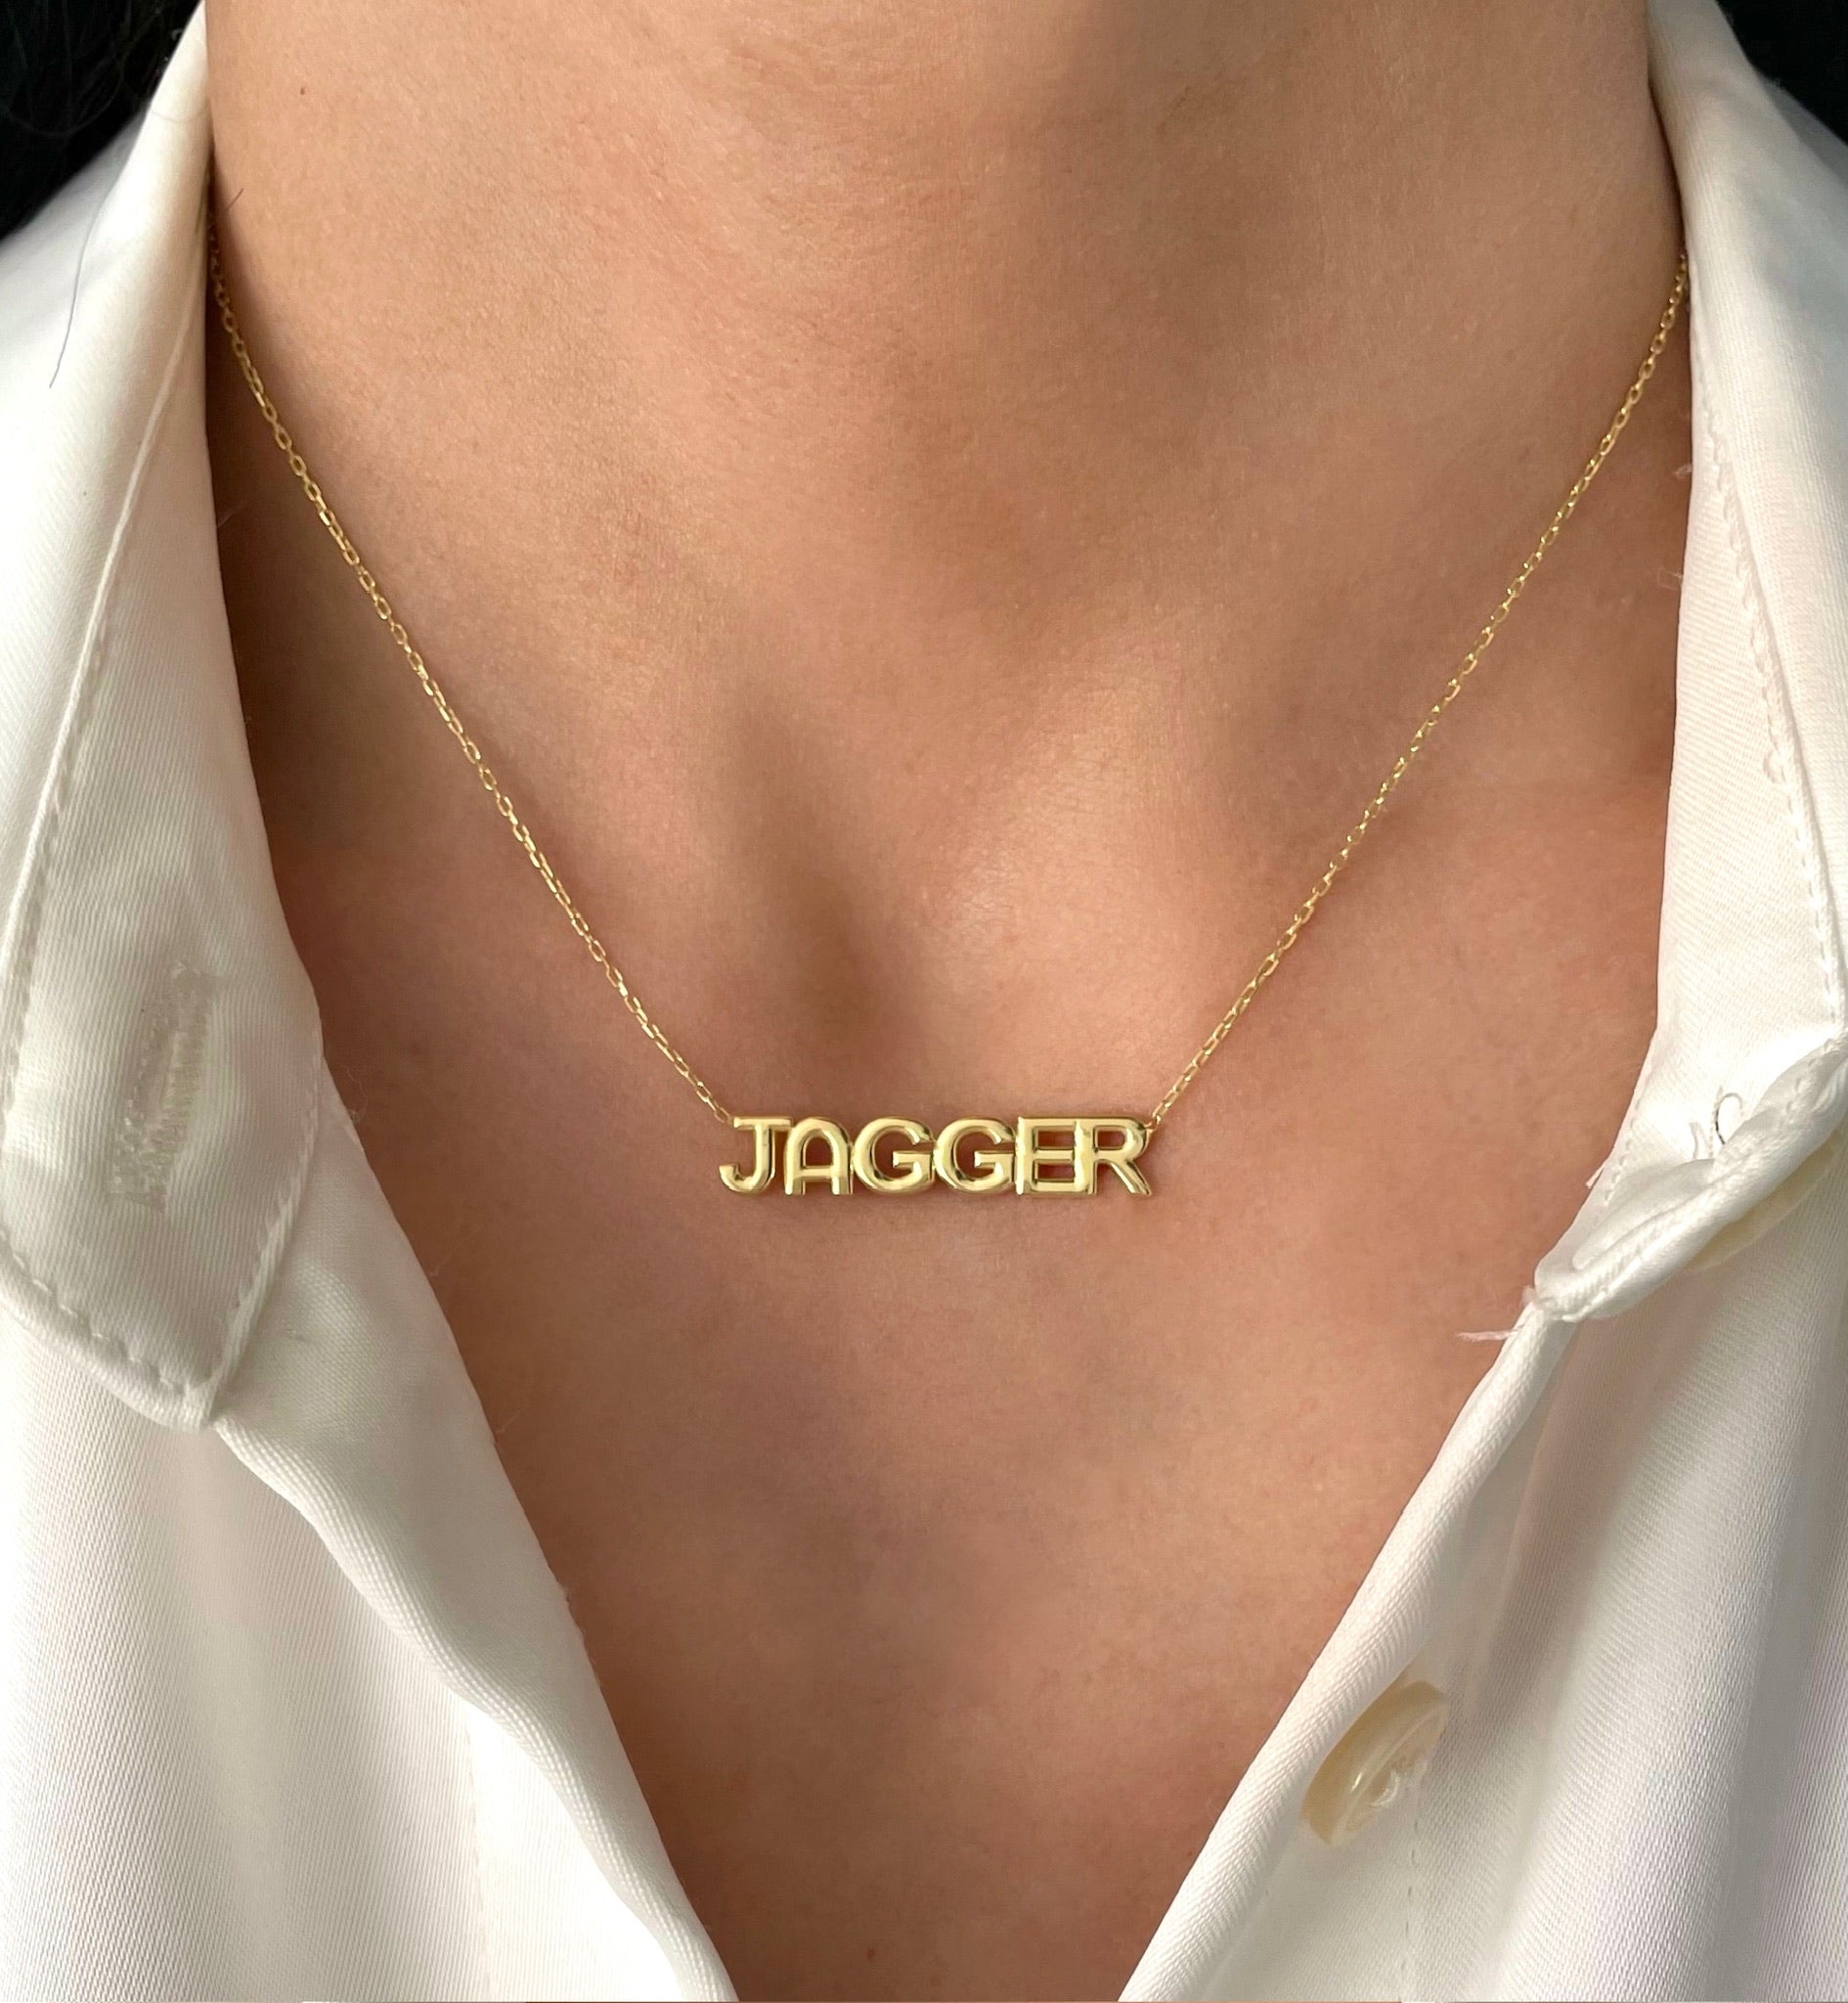 Limited Edition Name Necklace